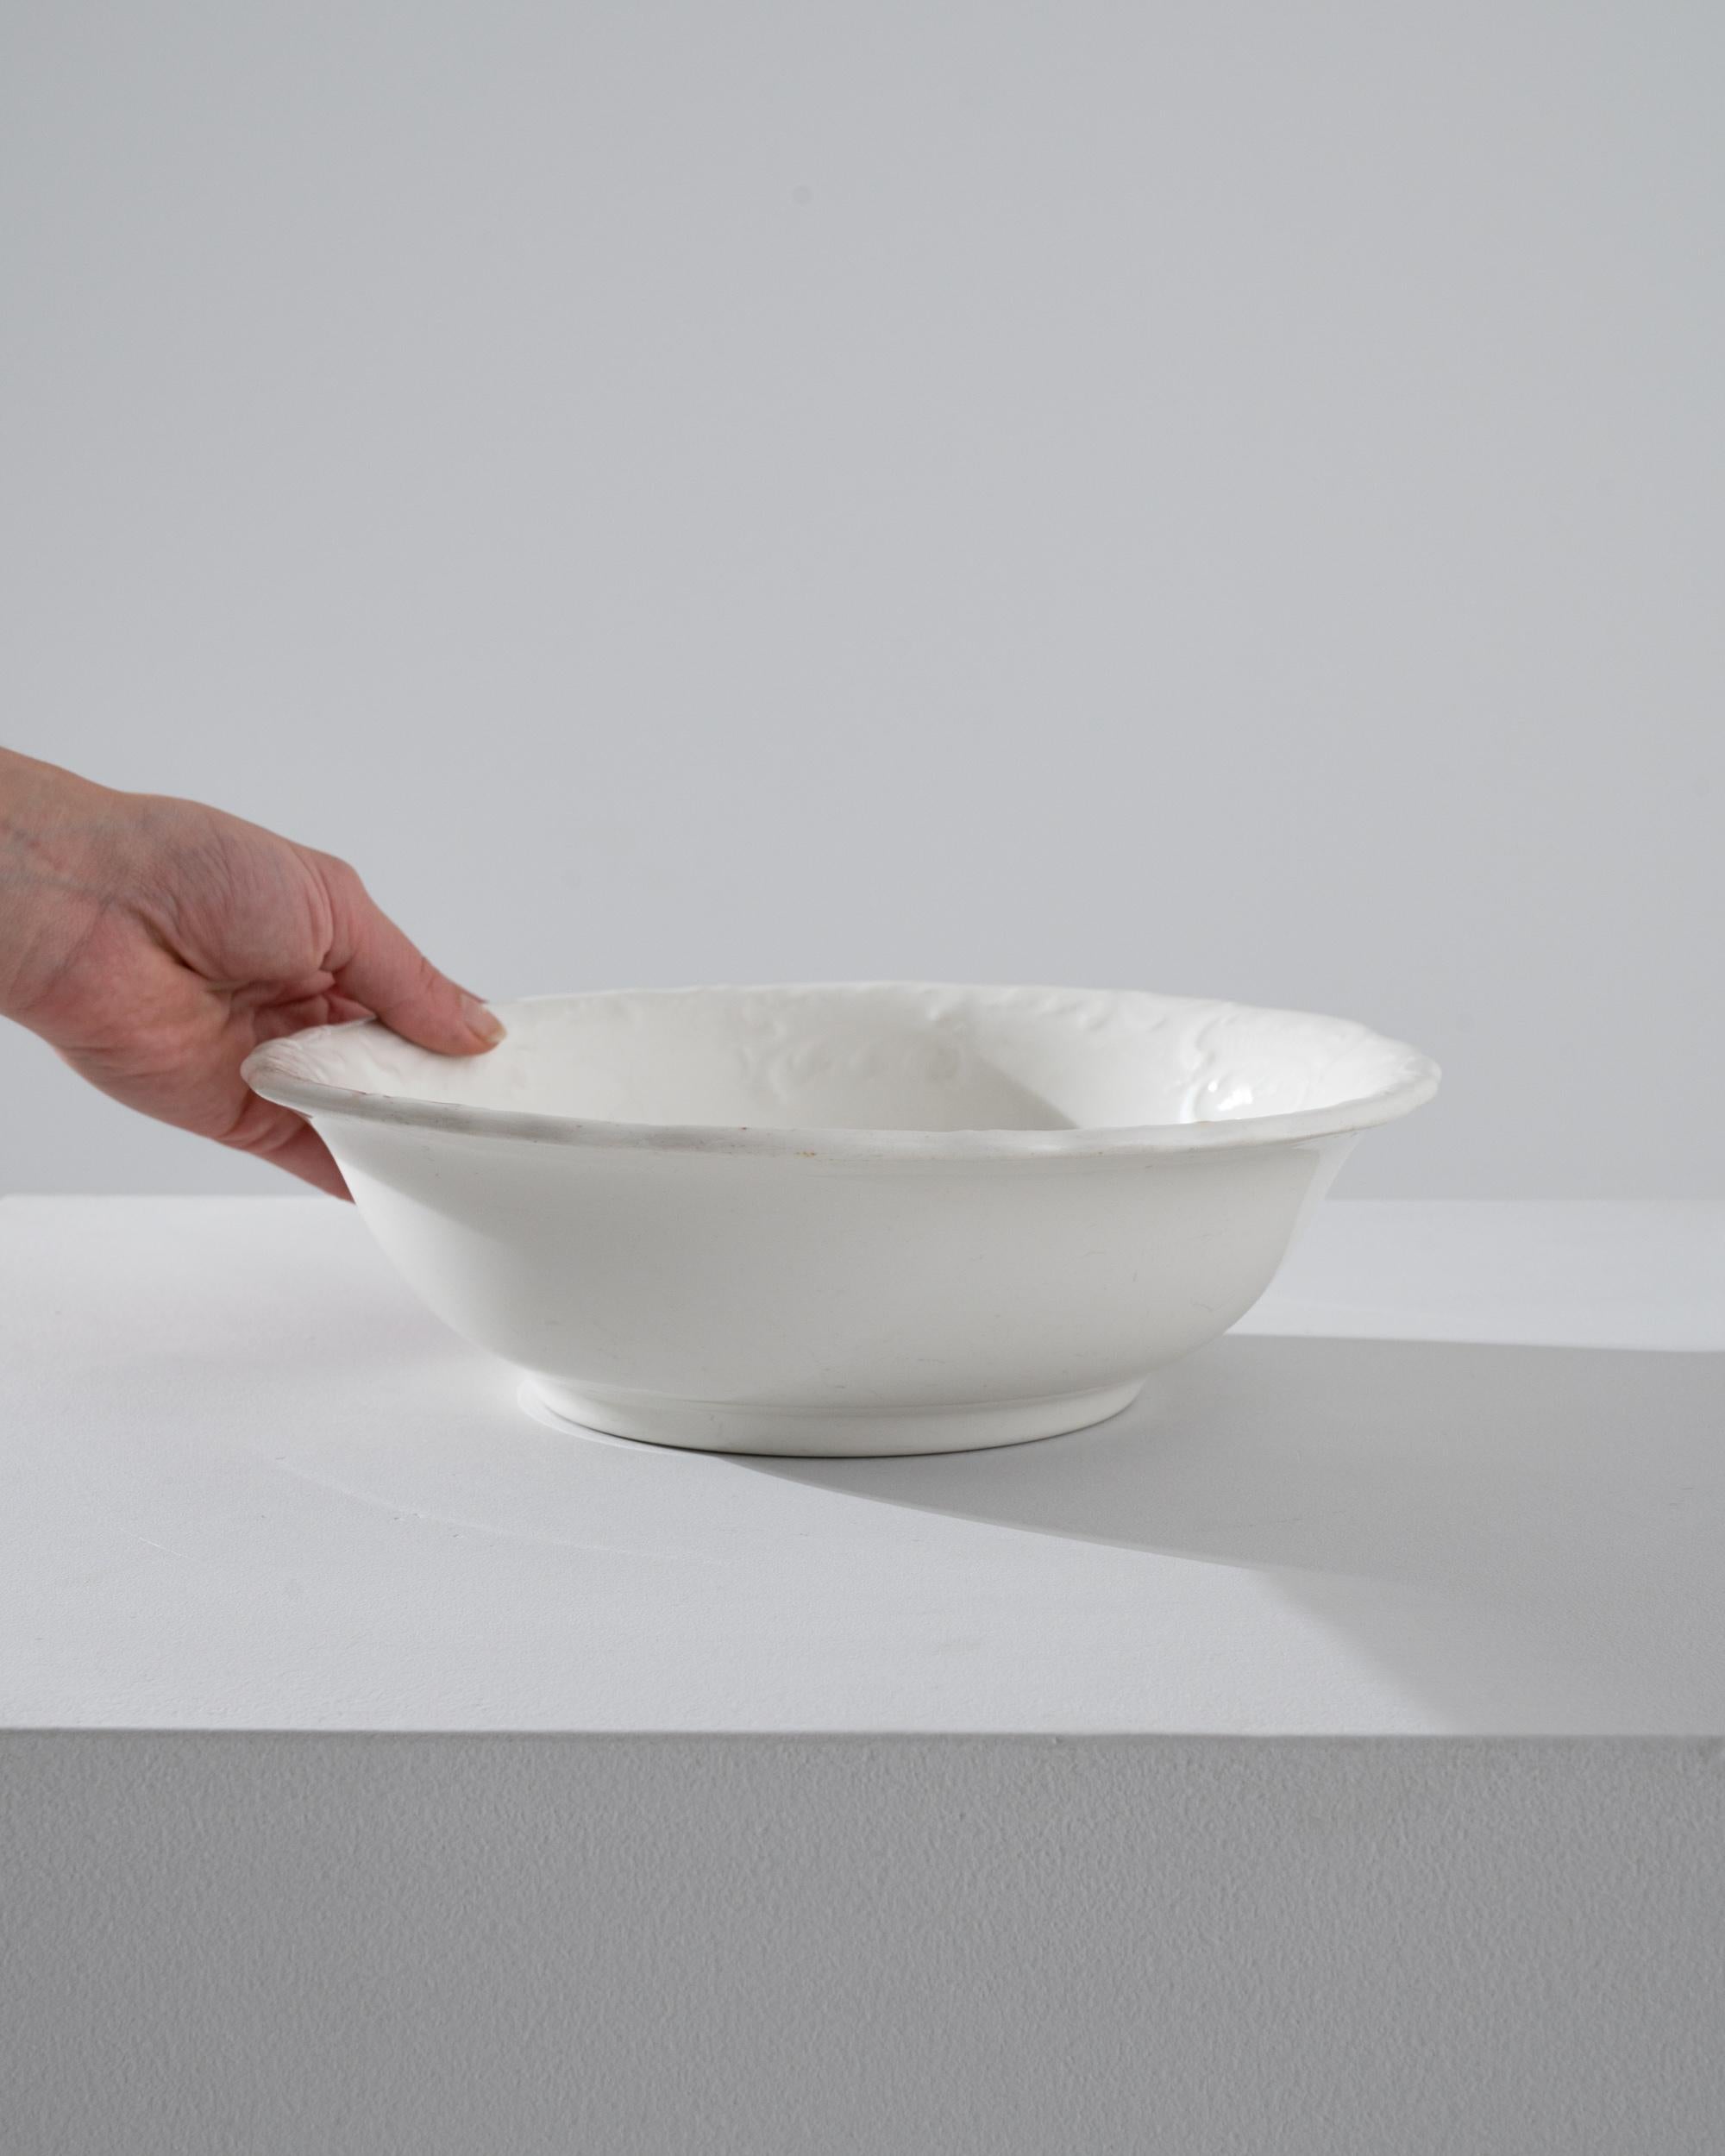 This 1900s Belgian porcelain bowl exudes a timeless charm with its understated elegance and classical simplicity. Its pristine white glaze and delicate scalloped edges speak of genteel afternoons and refined taste. The bowl's surface, adorned with